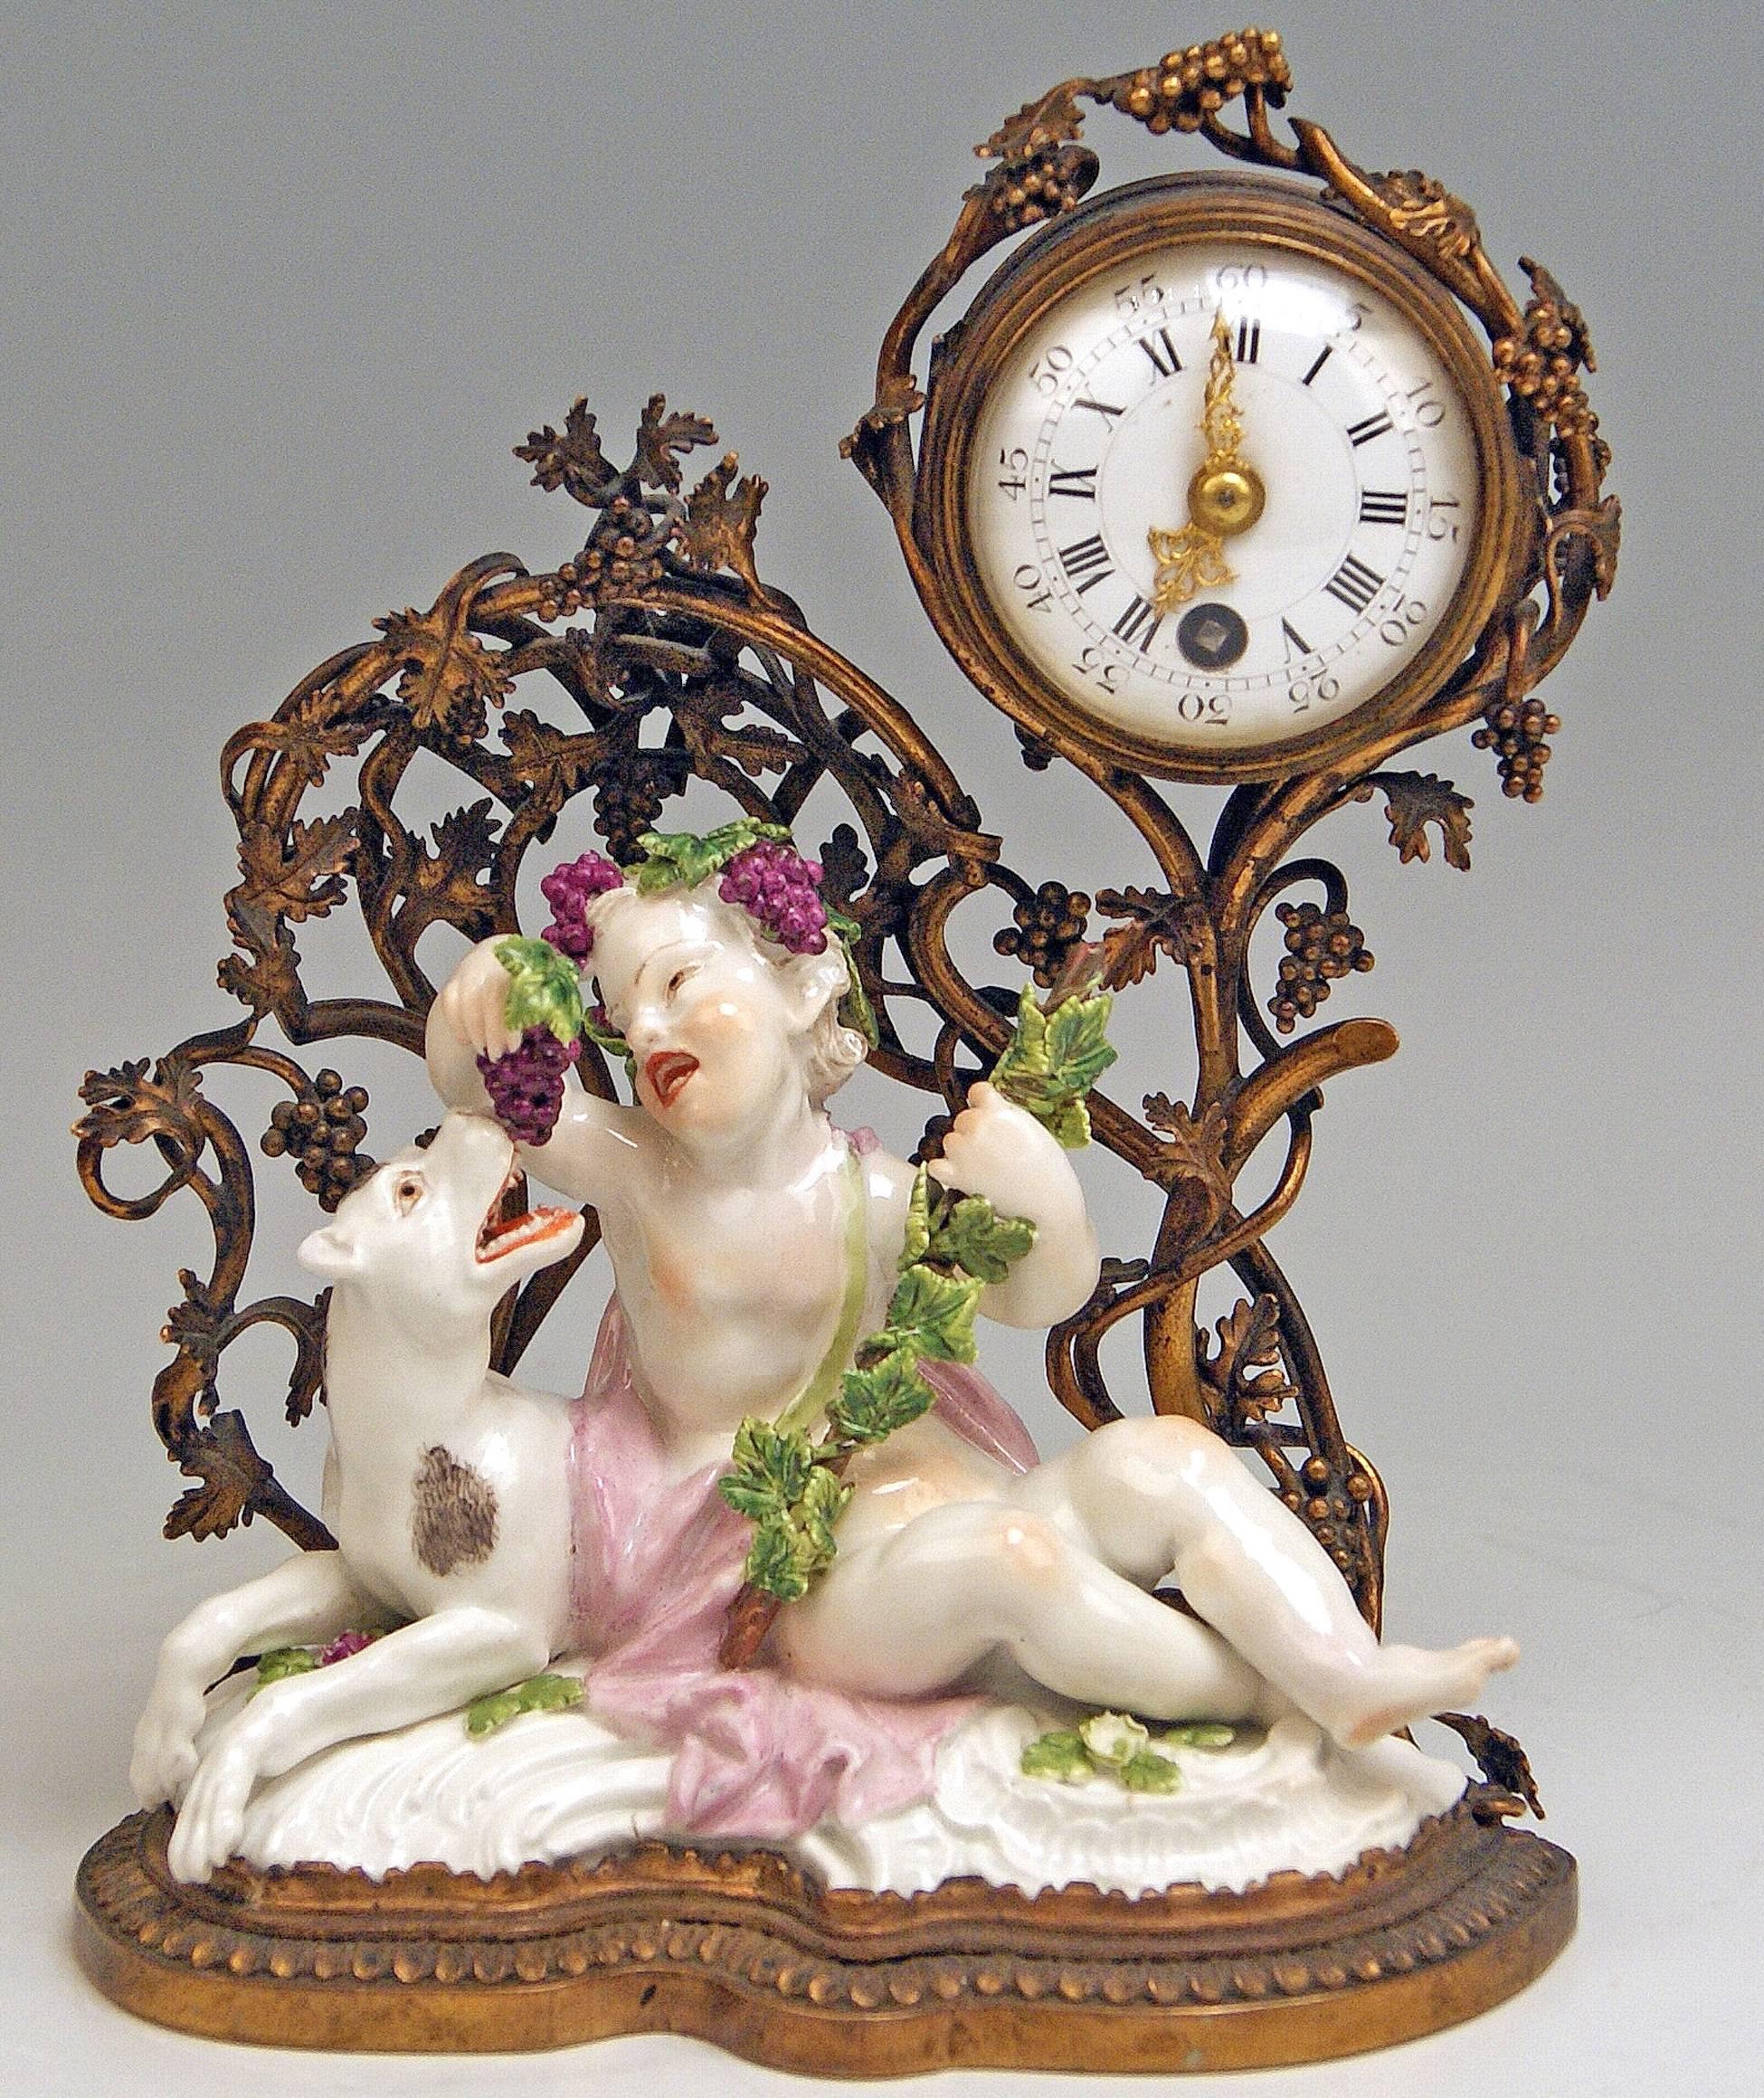 Meissen gorgeous rococo mantel / table clock made of gilded / gilt bronze, excellently decorated with sculptured figurines made of porcelain.

Manufactory: Meissen
Hallmarked: Blue Meissen Sword Mark (bottom of figurines glazed)
First